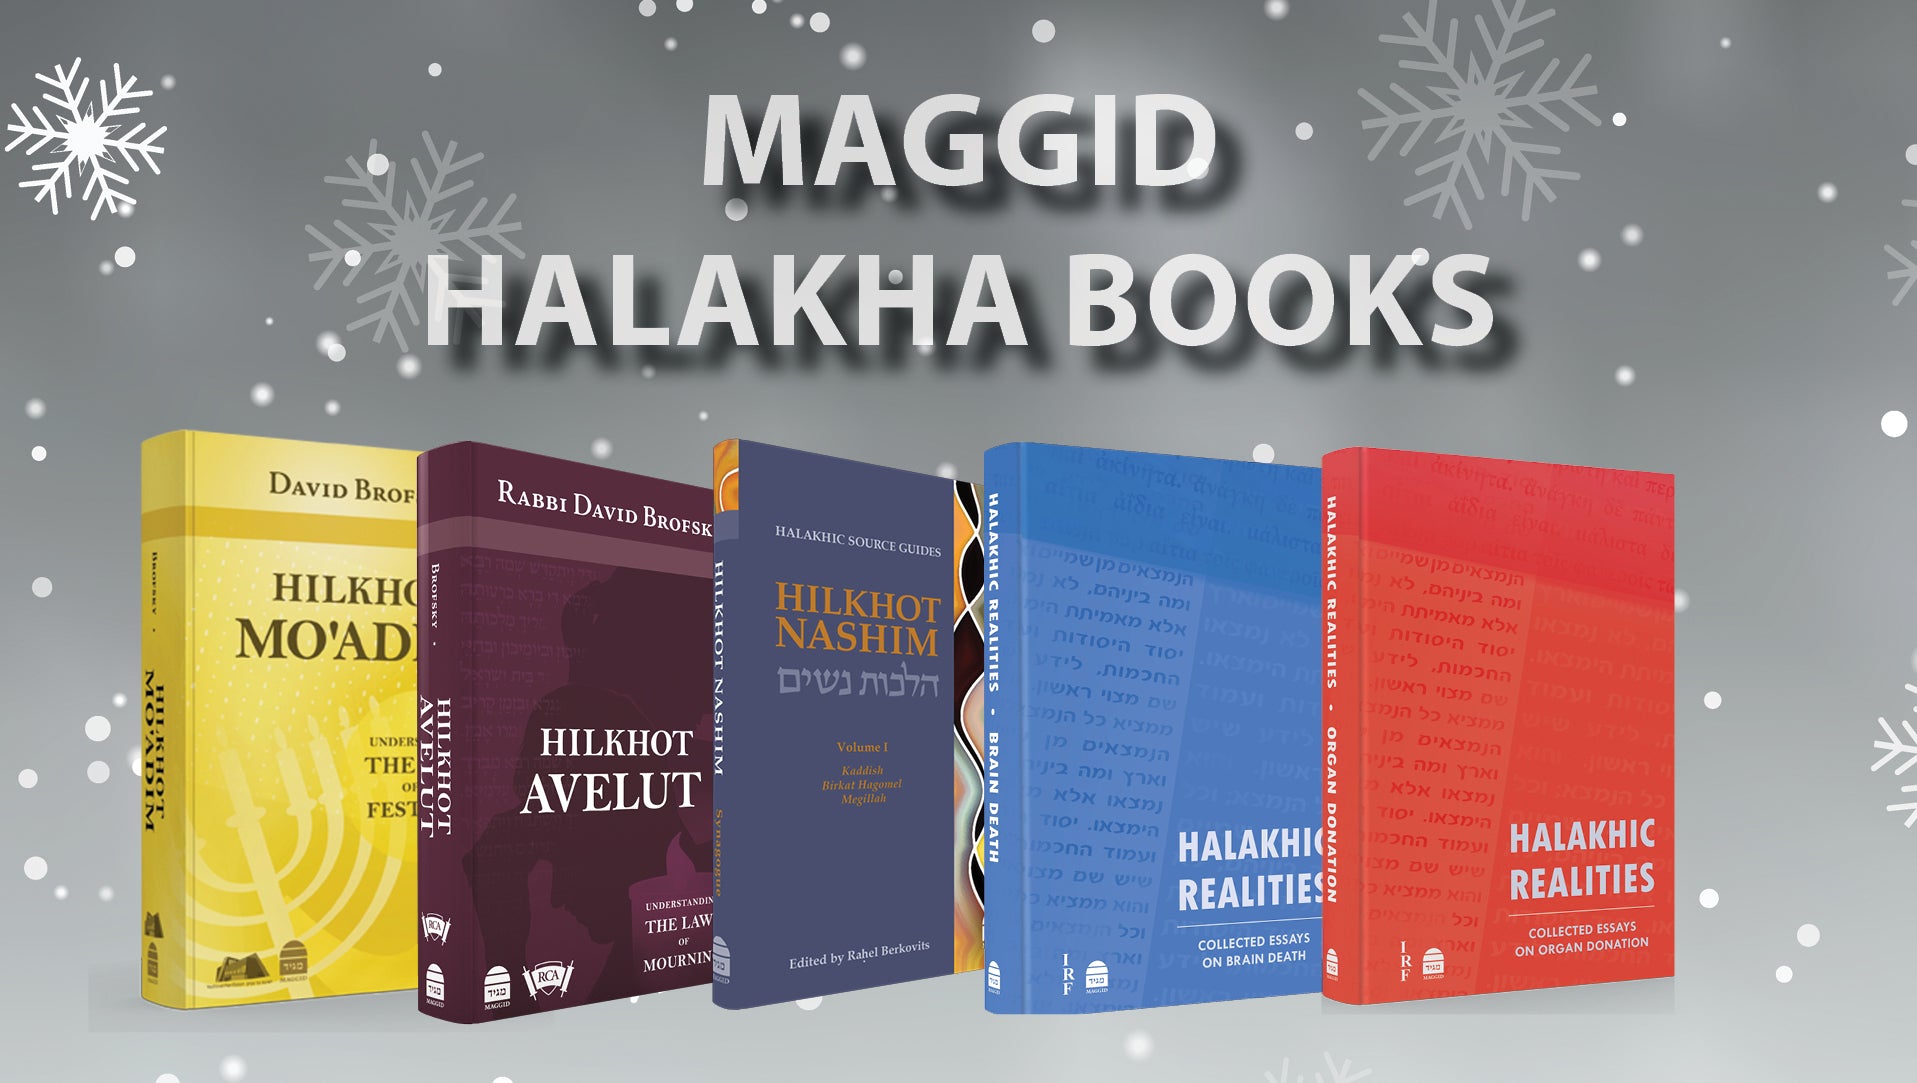 Maggid Books Halakha Collection Part 1